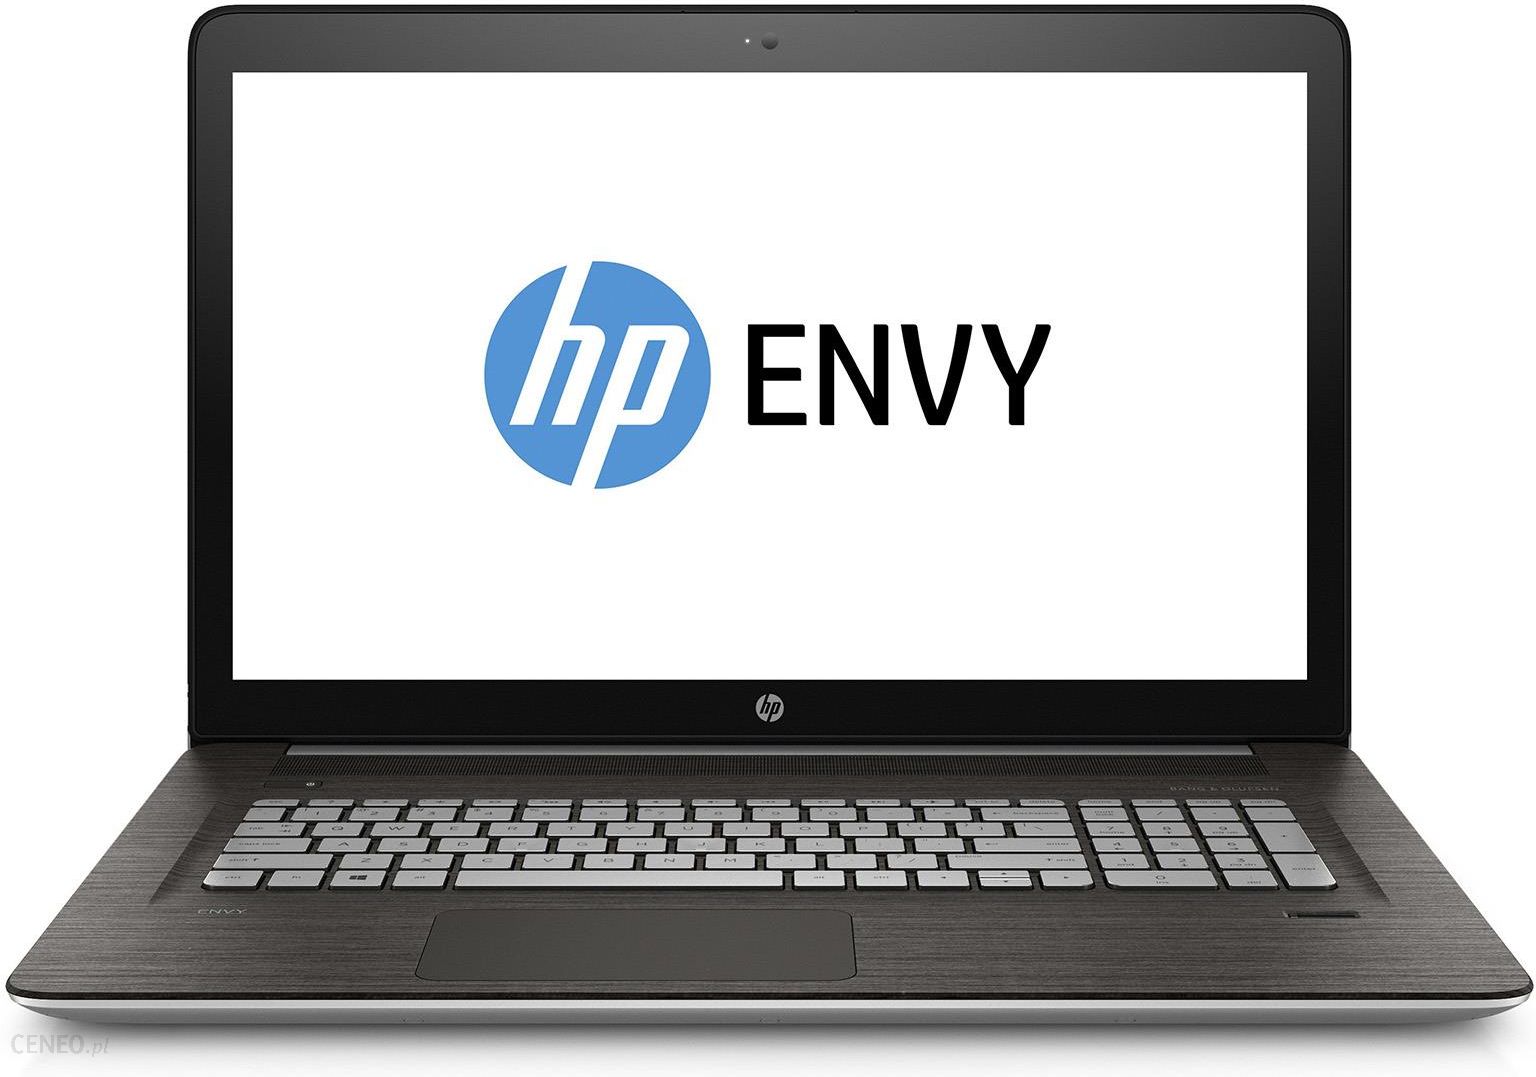 how to enable turbo boost on hp envy 17 laptop i7 6700hq